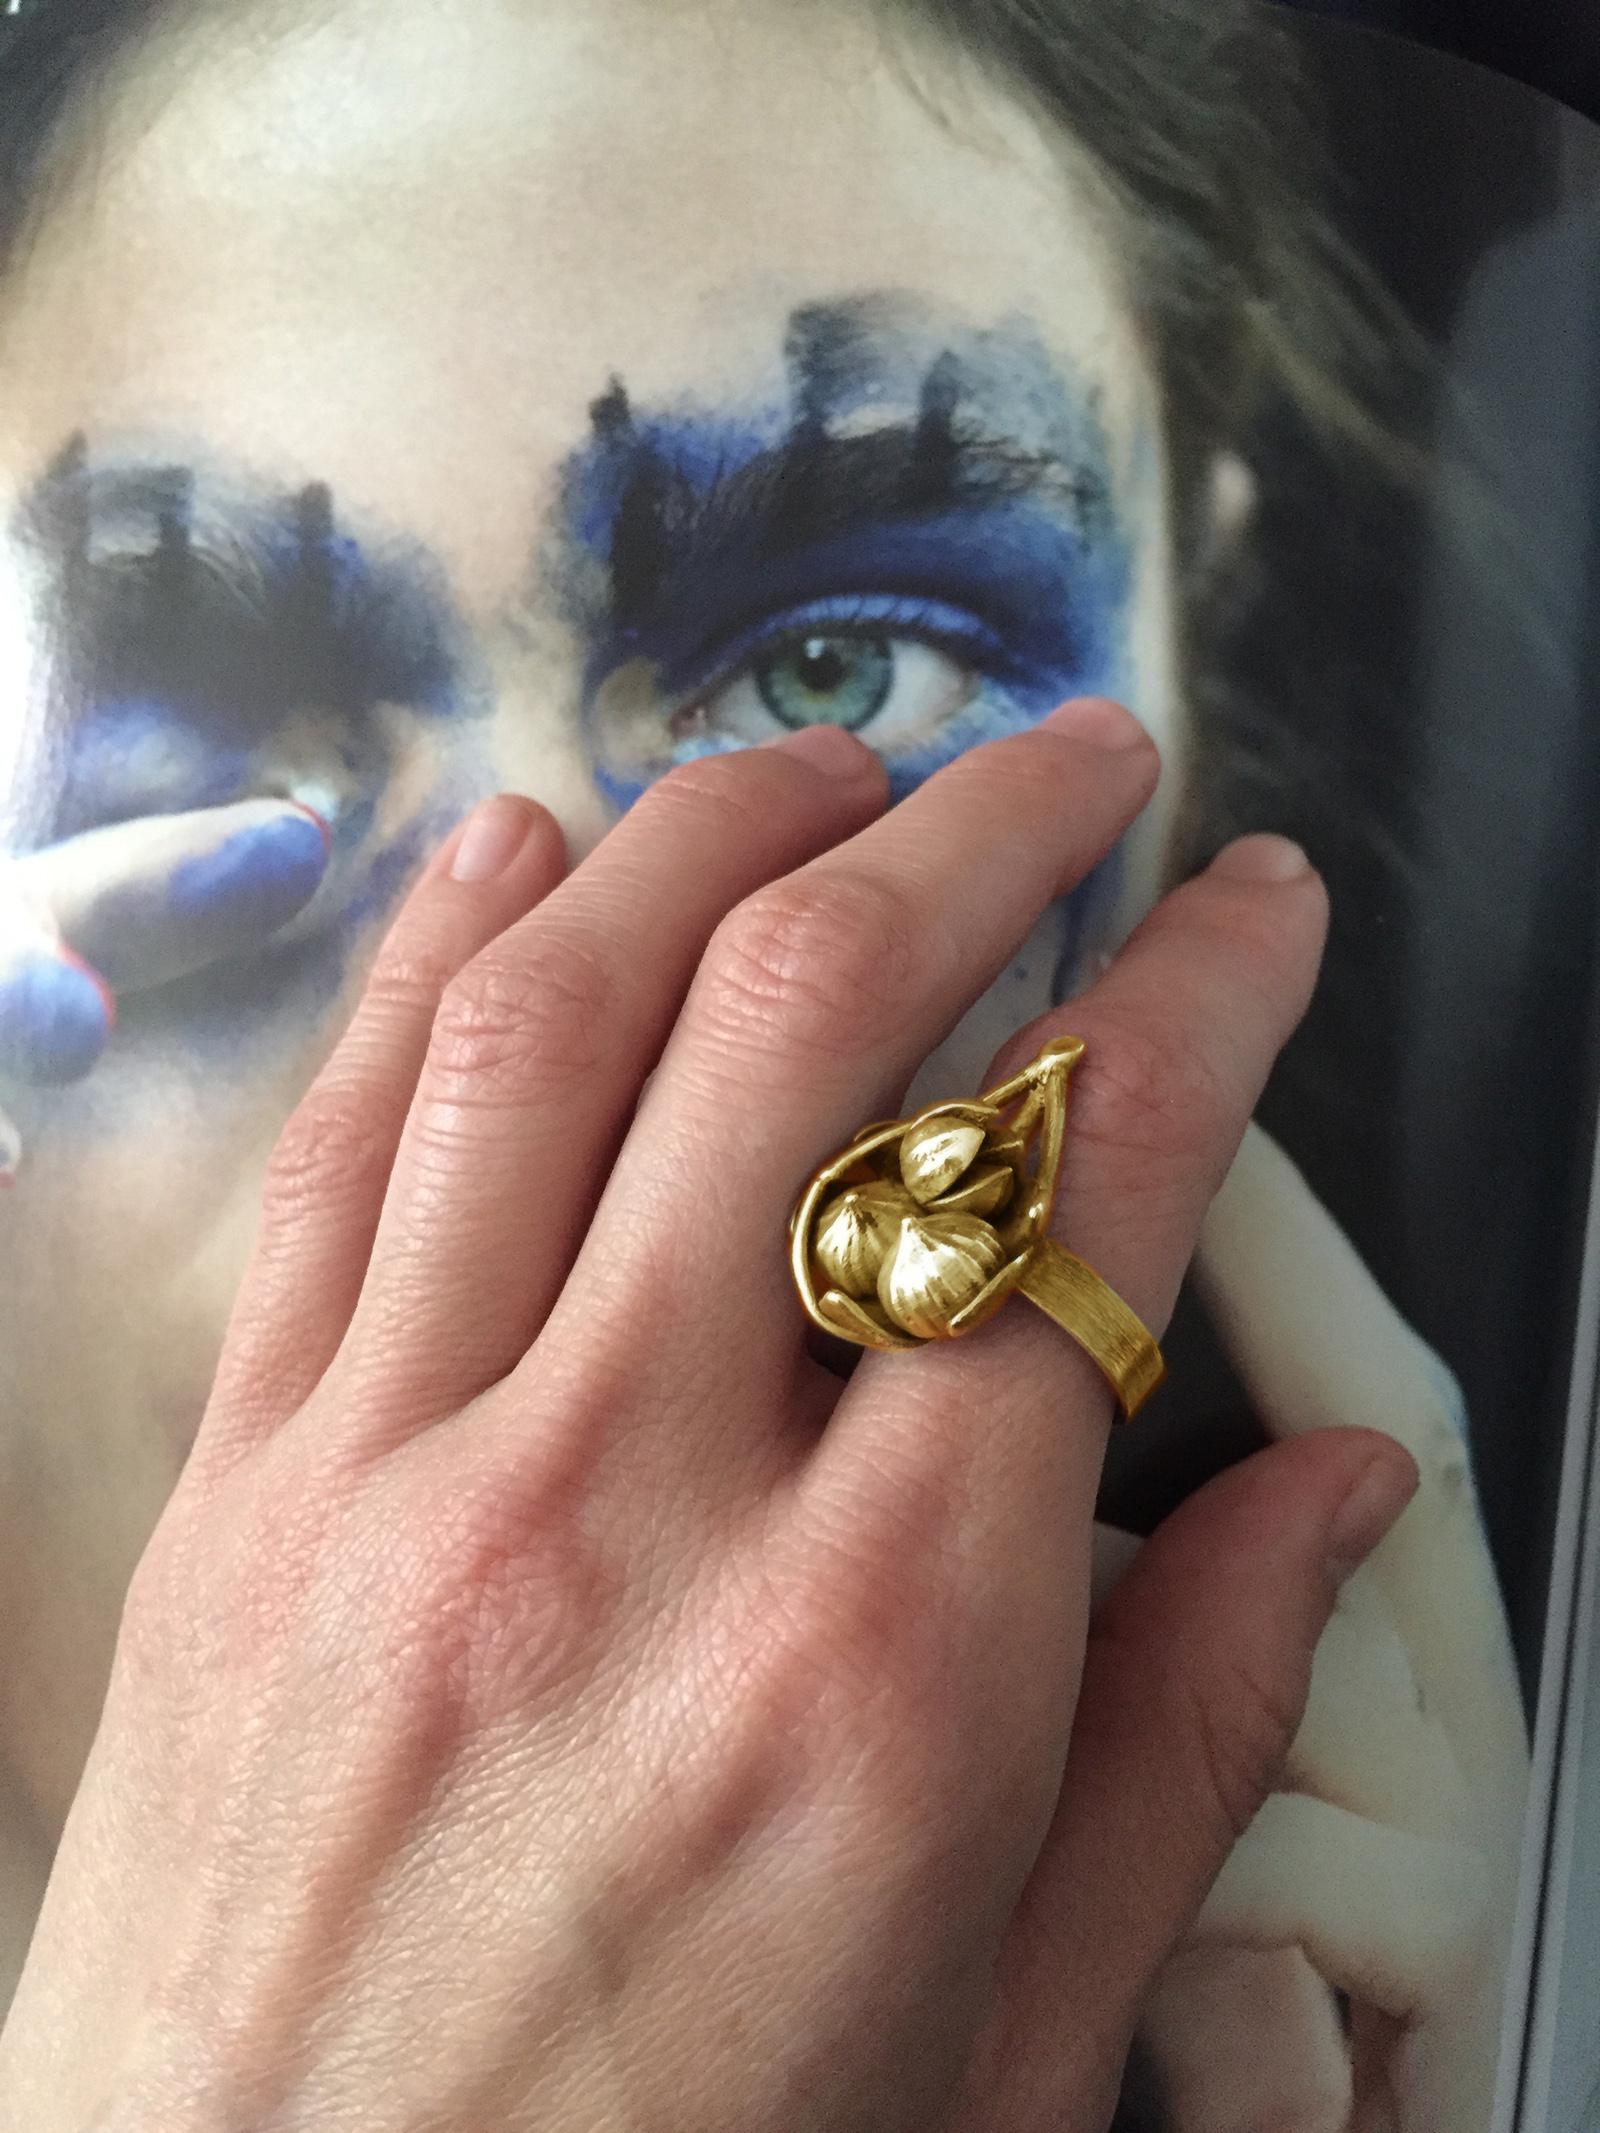 This Figs on the Leaf art nouveau cocktail ring is made of 14 karat yellow. It is limited edition collection, which was featured in Vogue UA.

It is designed by oil painter Polya Medvedeva, and was inspired by Claude Monet Nympheas, their shapes and